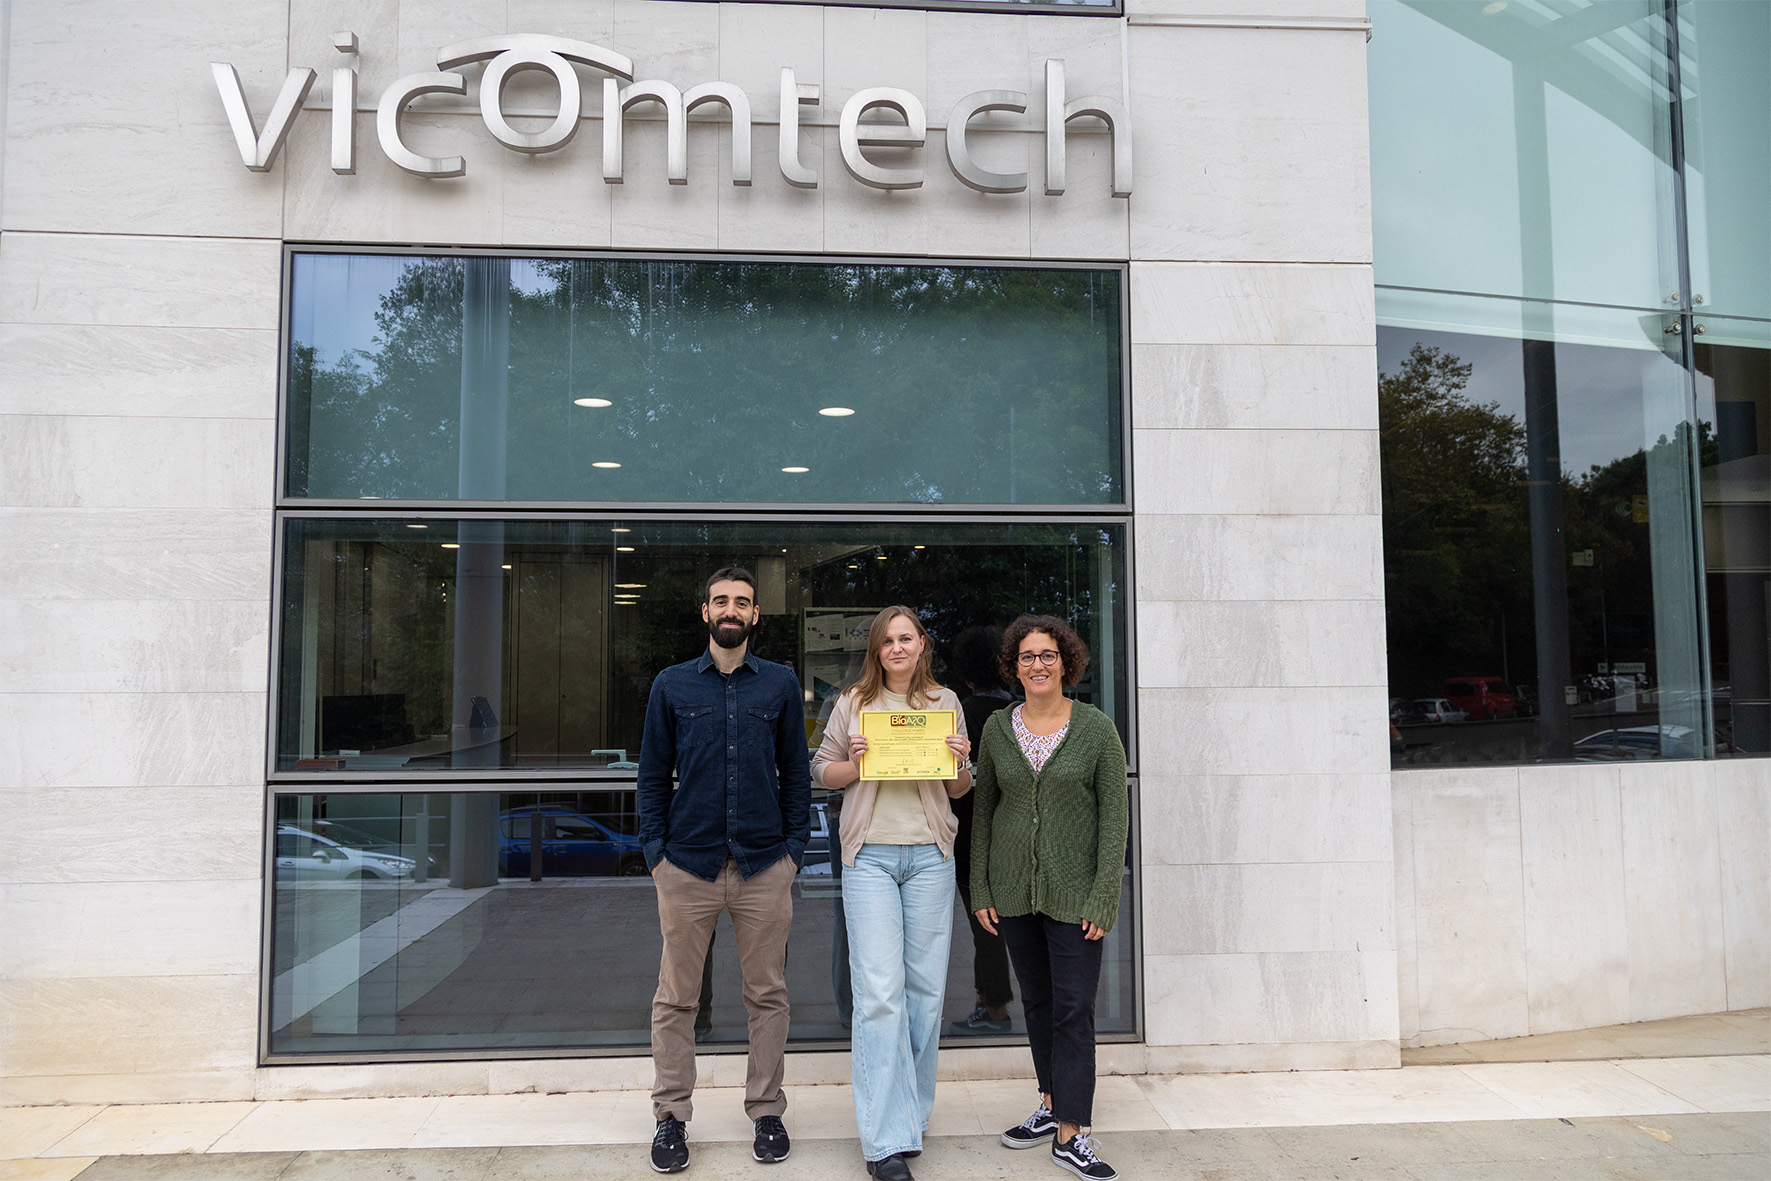 Vicomtech researchers obtain the best results in one of the workshops of the CLEF 2023 conference in Thessaloniki, Greece.